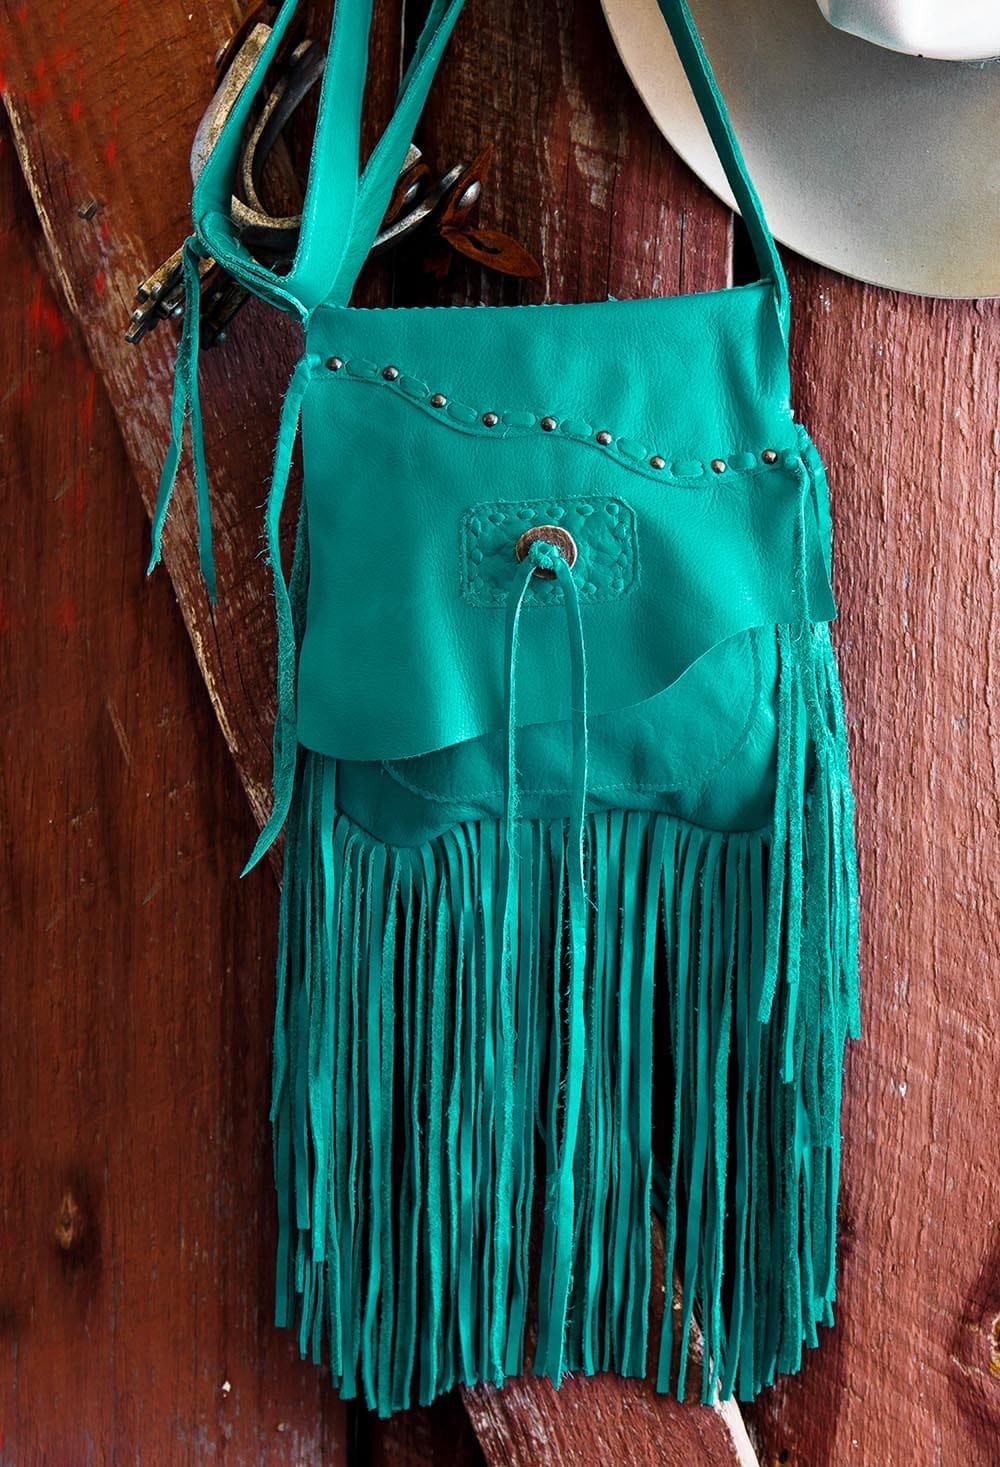 Leather Bag With Fringe, Leather Tote Bag With Zipper, Shoulder Leather Bag,  Fringe Leather Purse, Soft Leather Purse, Hobo Bag Purse - Etsy Ireland